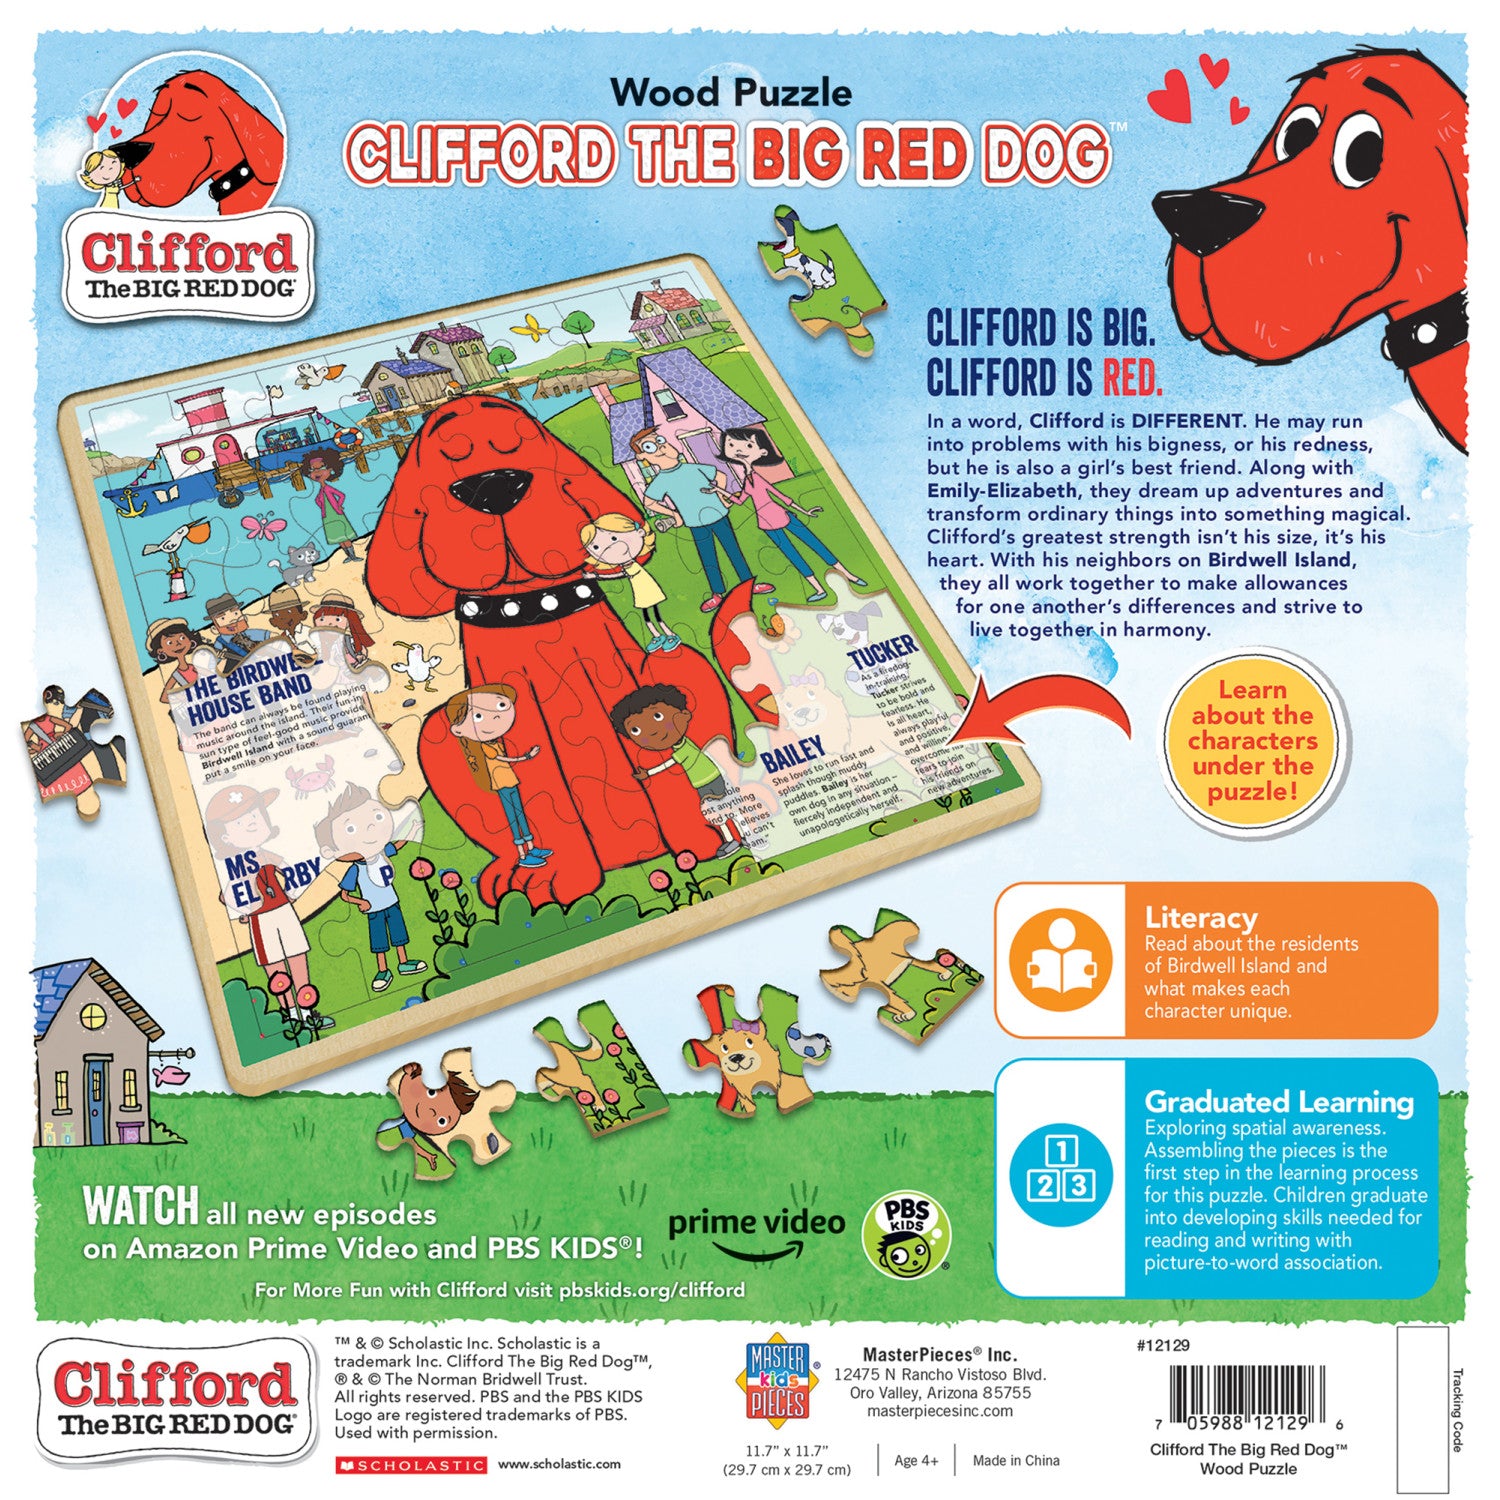 Clifford The Big Red Dog  48 Piece Wood Puzzle